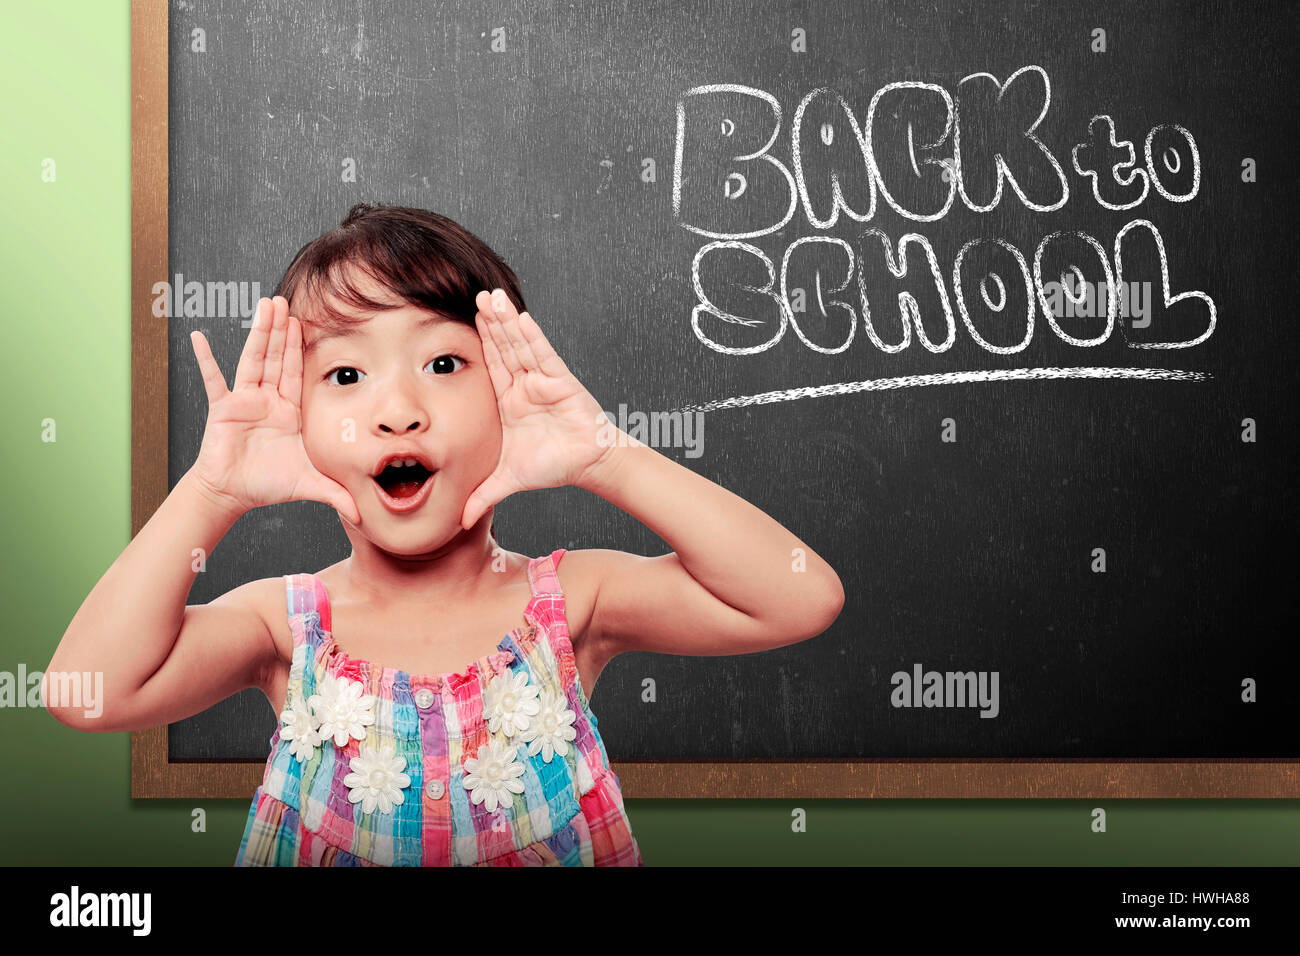 Cheerful smiling little girl on chalkboard background. Looking at camera. Back to school concept Stock Photo